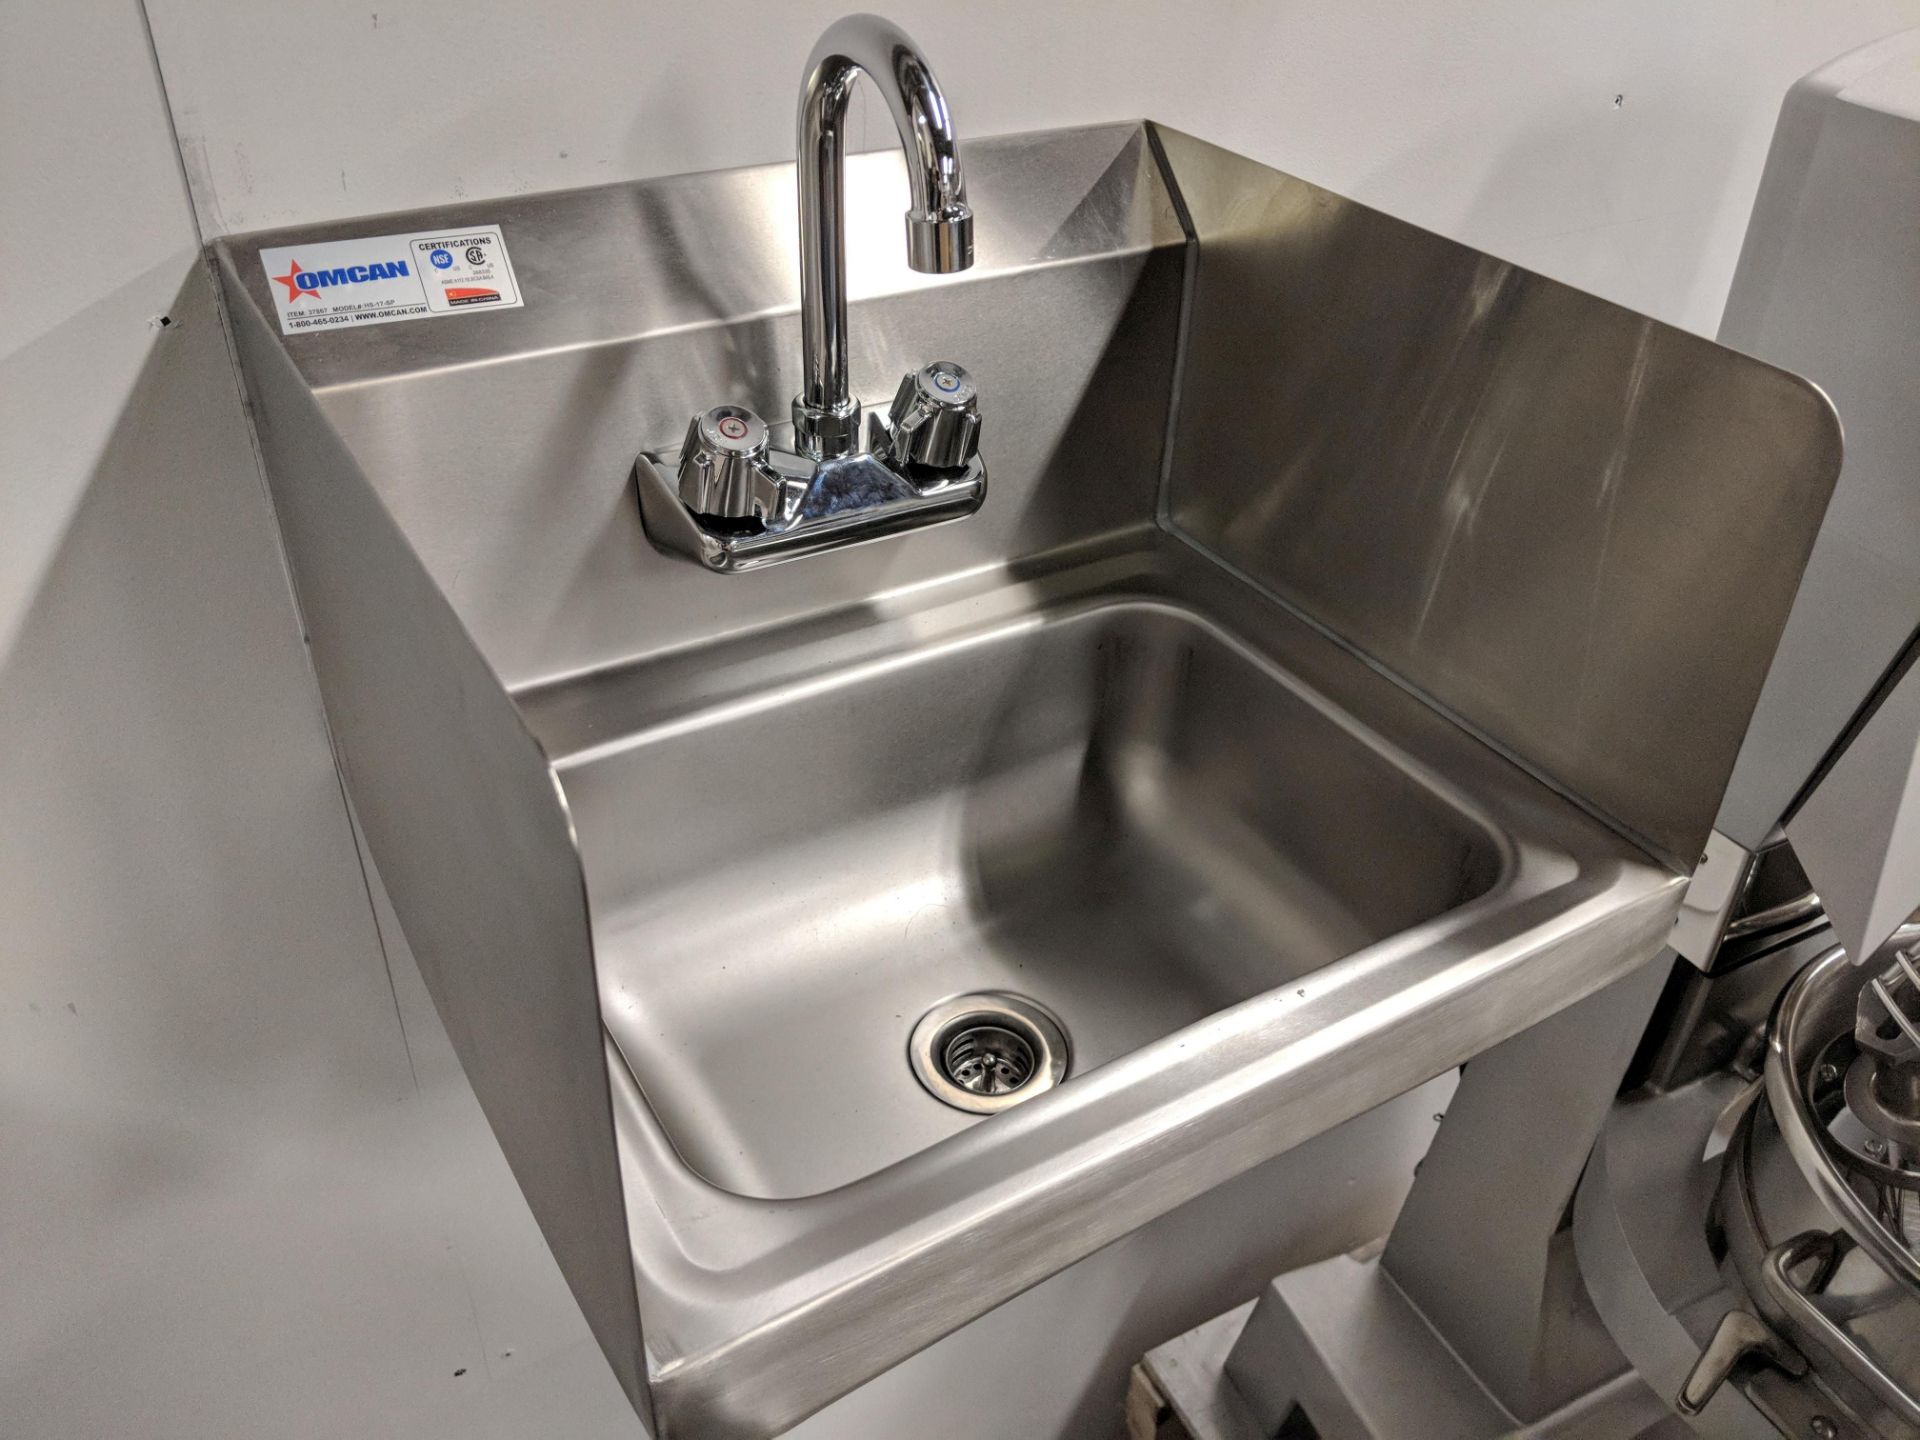 Hand Sink w/Faucet & Side Splashes, Overall Dims 15.25” x 17” x 13.5”, Bowl Dims 14” x 10” x 6”